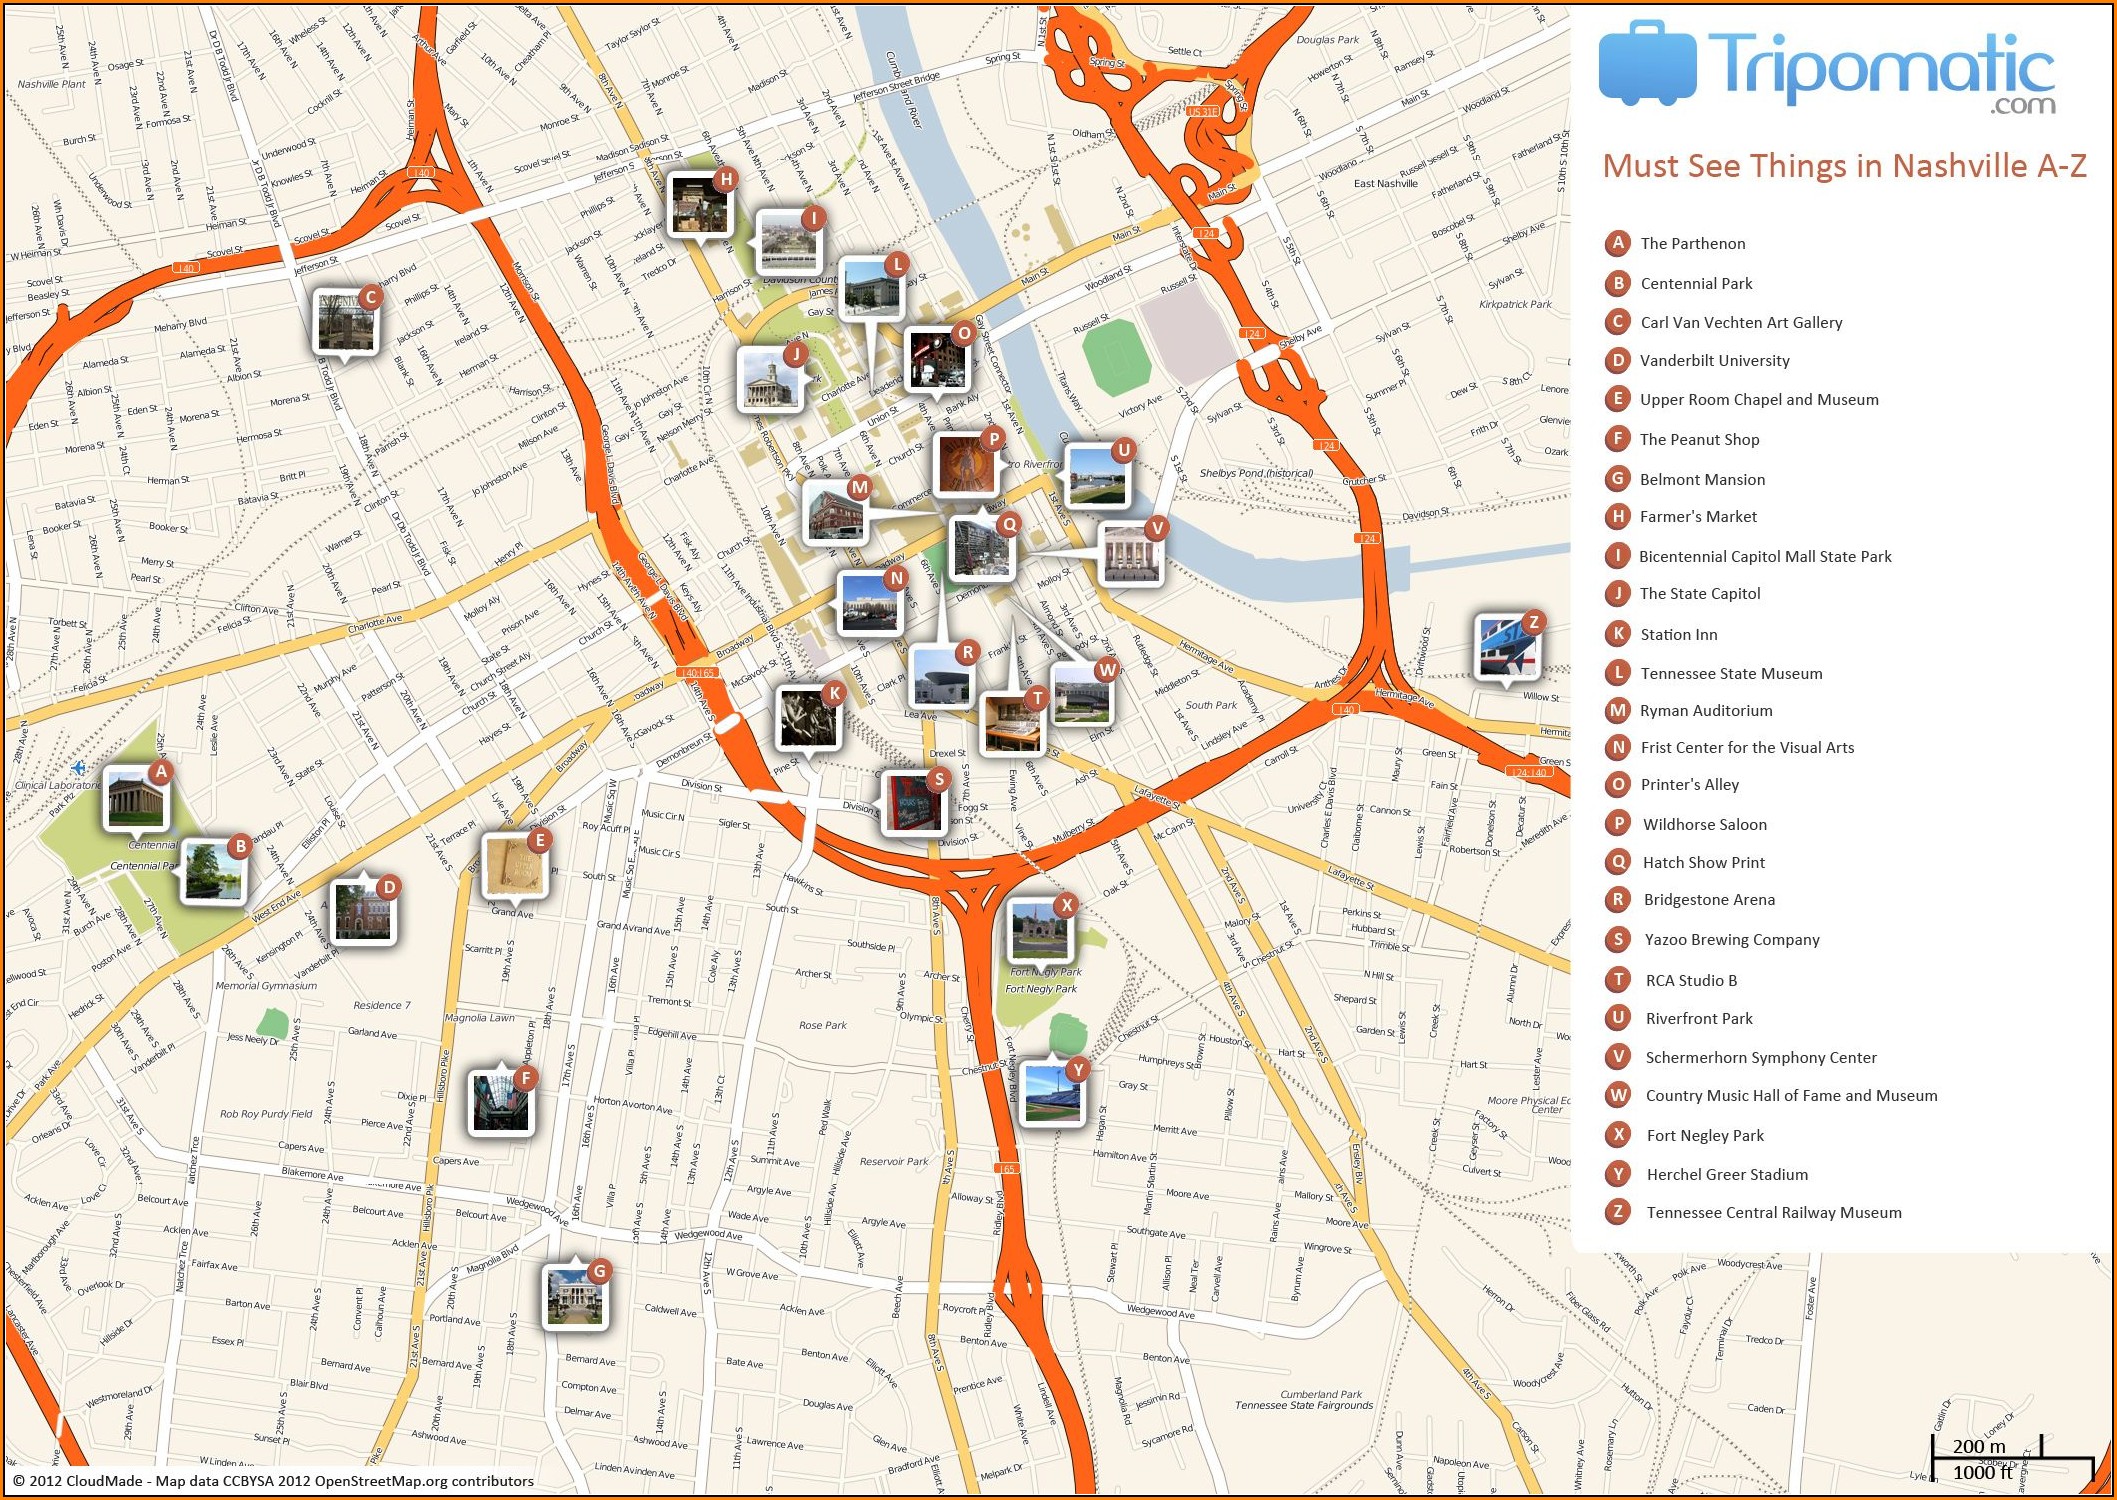 Printable Map Of Nashville Attractions